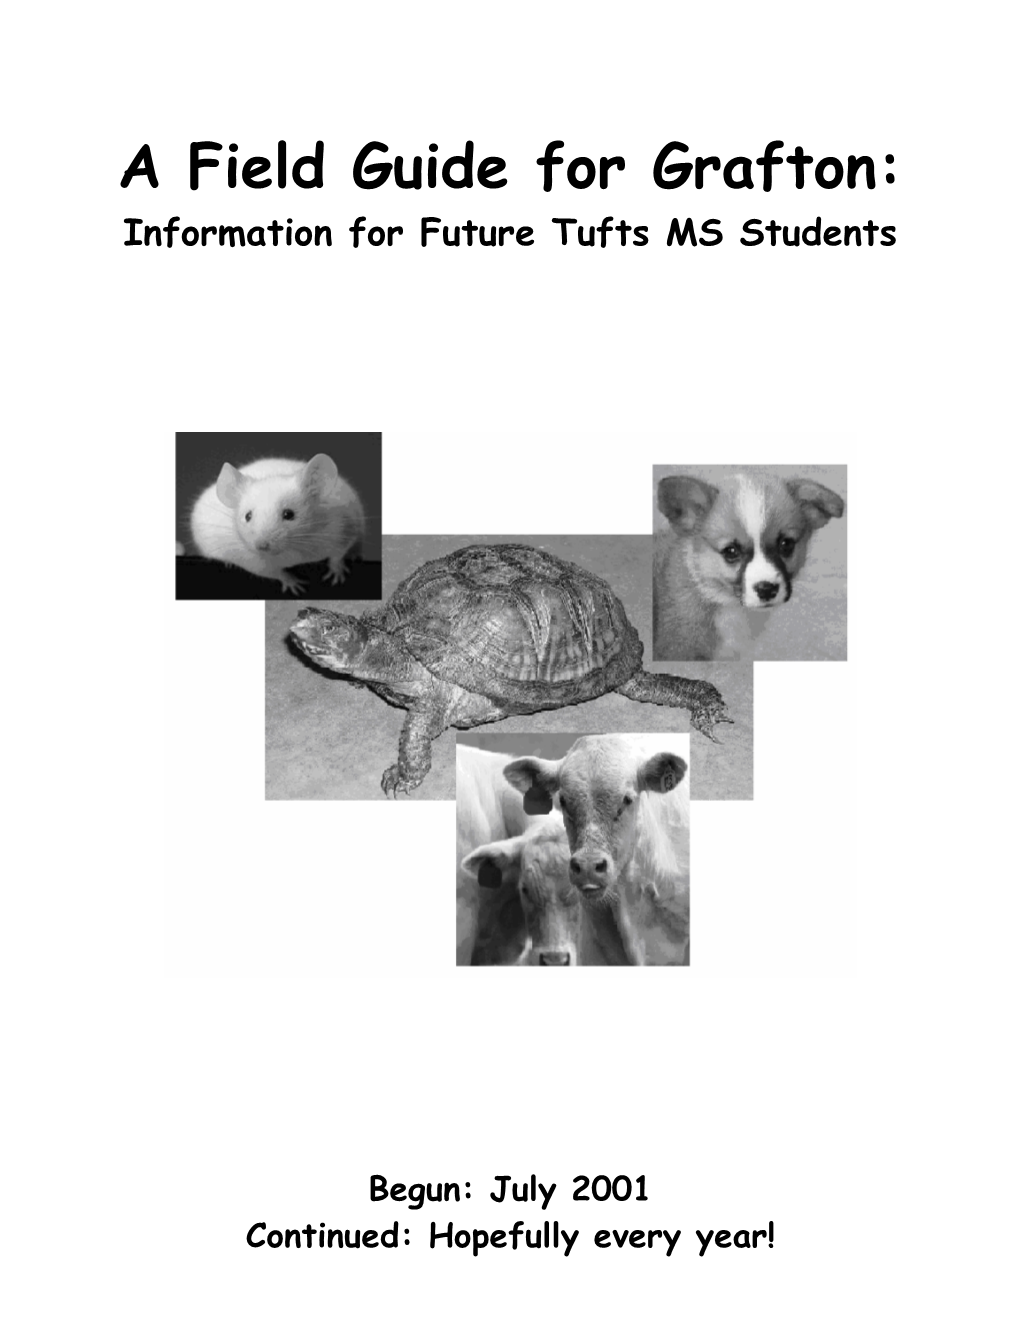 A Field Guide for Grafton: Information for Future Tufts MS Students